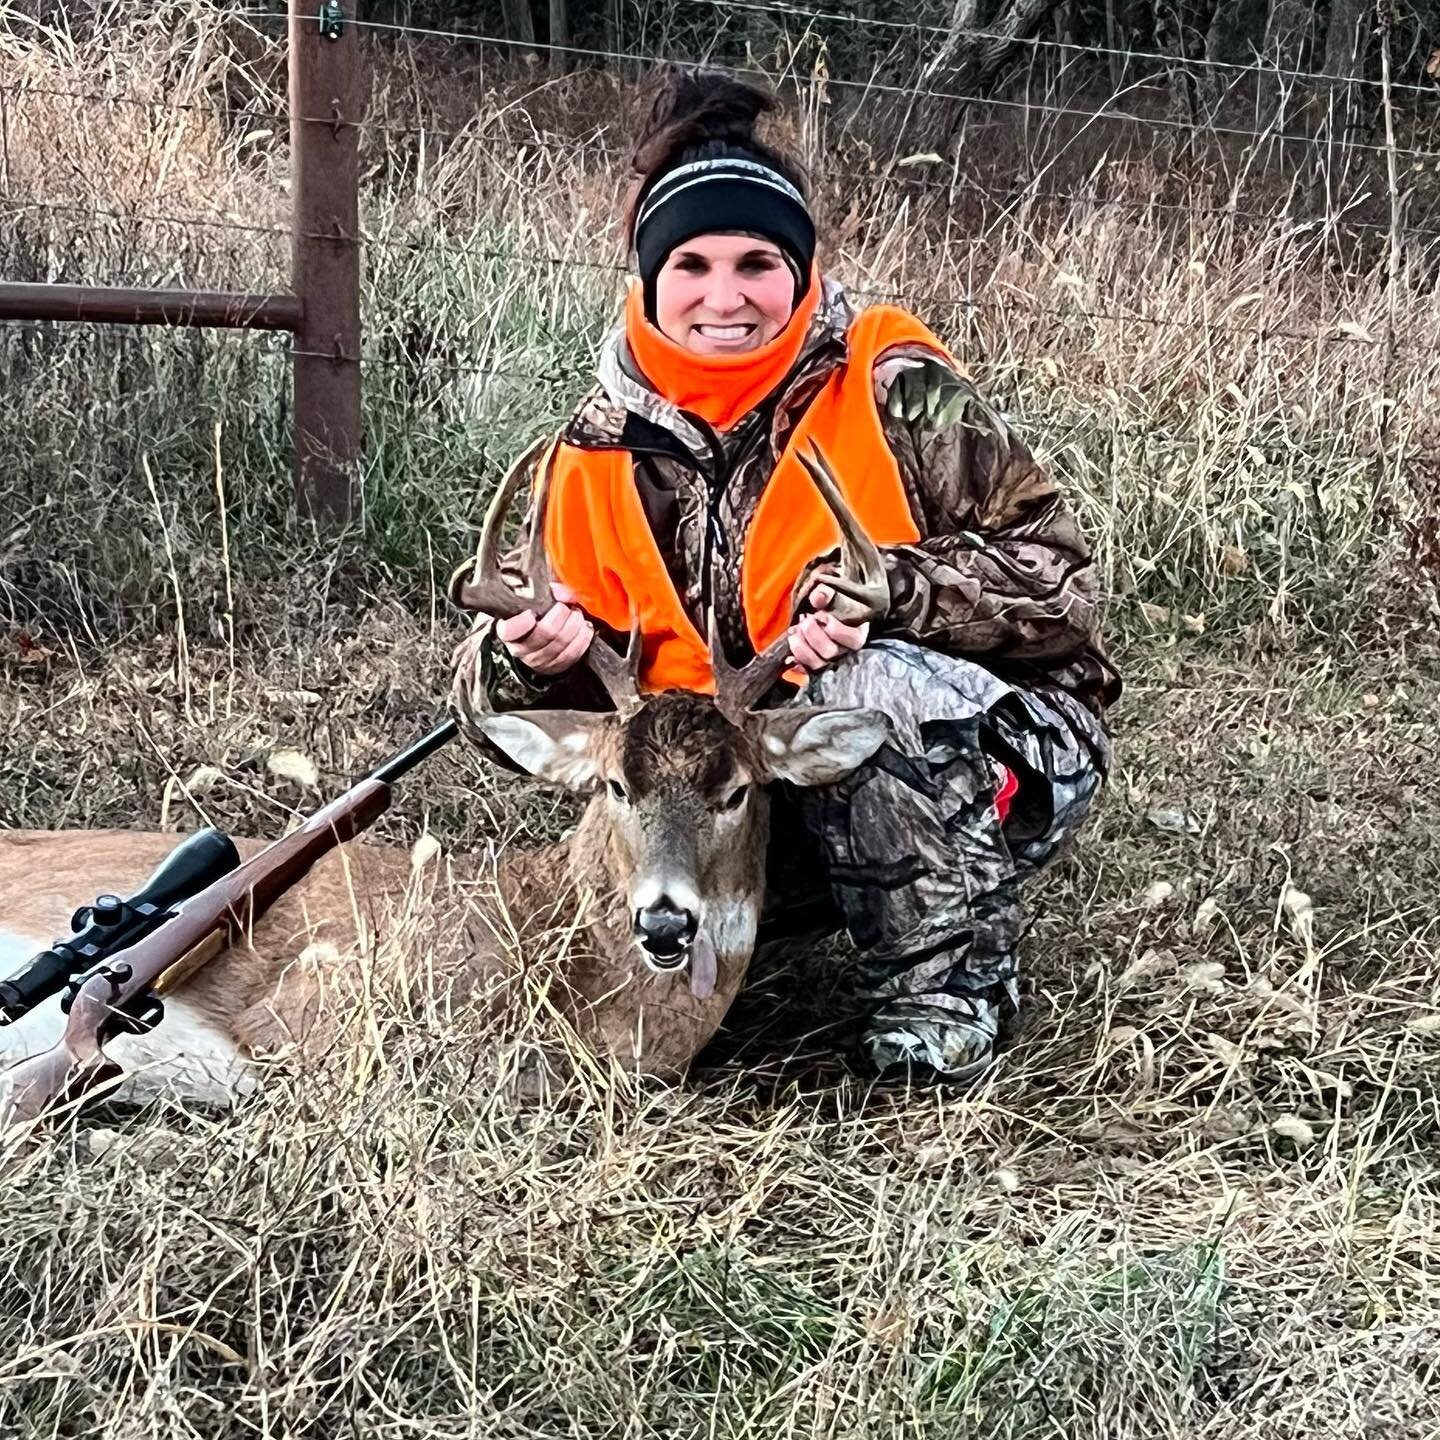 It&rsquo;s #deadweek for #deerhunting so here&rsquo;s a #flashbackfriday from last year&rsquo;s #seasontoremember!!! #Soexcited to see what this year has in store! #Godisgood #getoutdoors #fbf